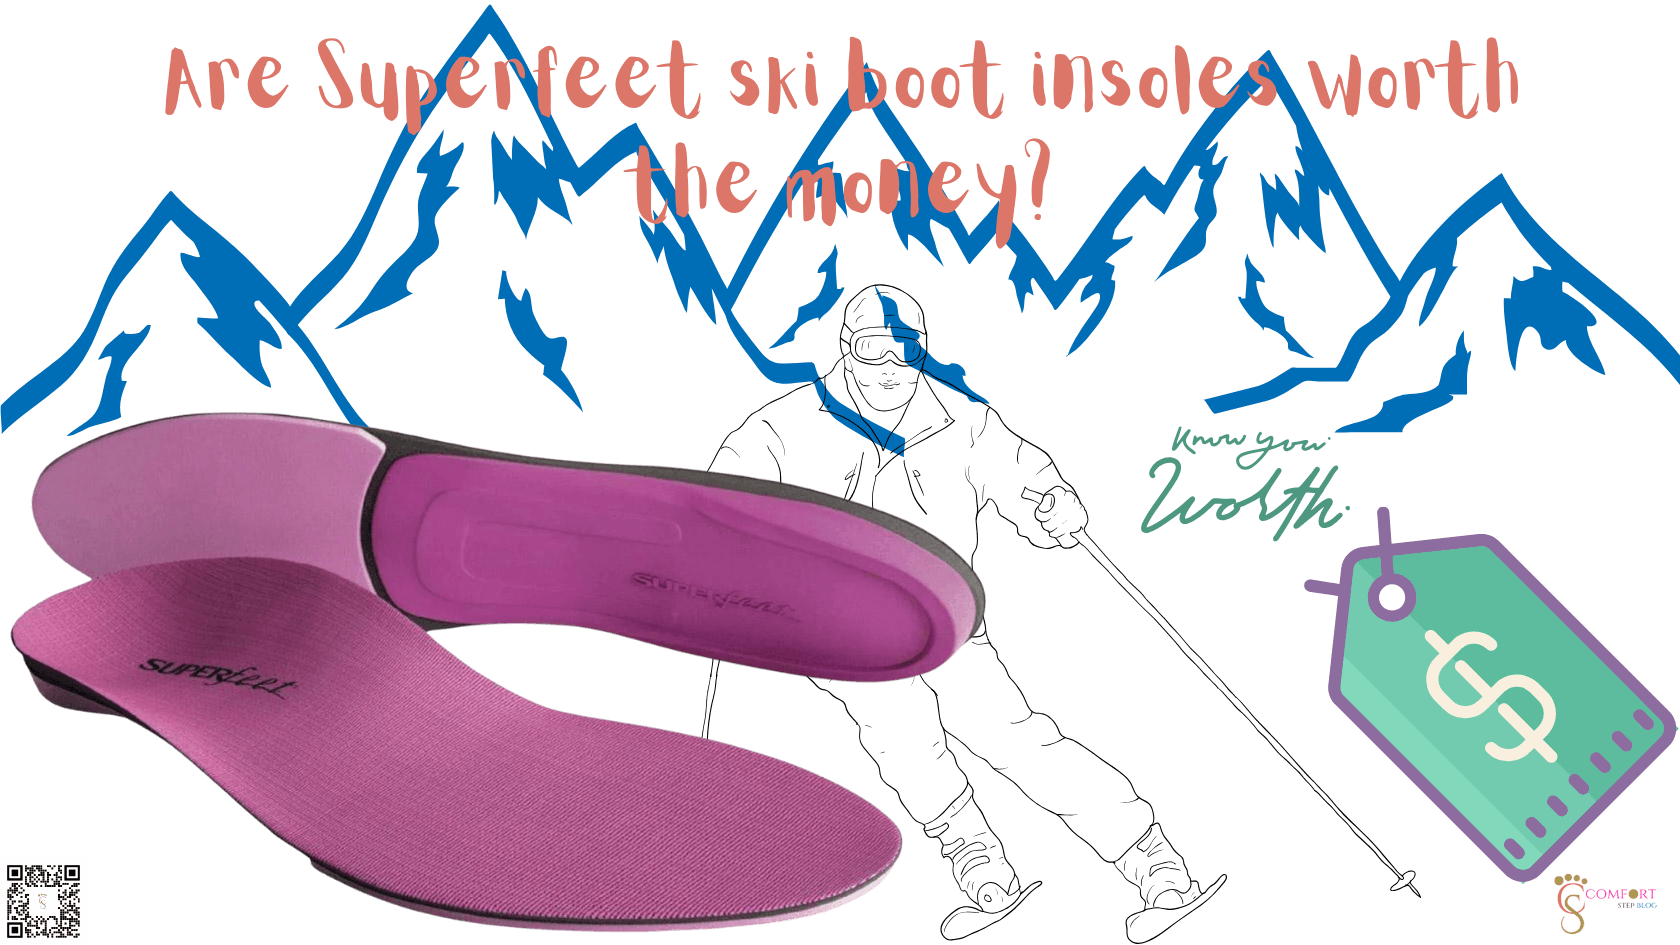 Are Superfeet ski boot insoles worth the money?